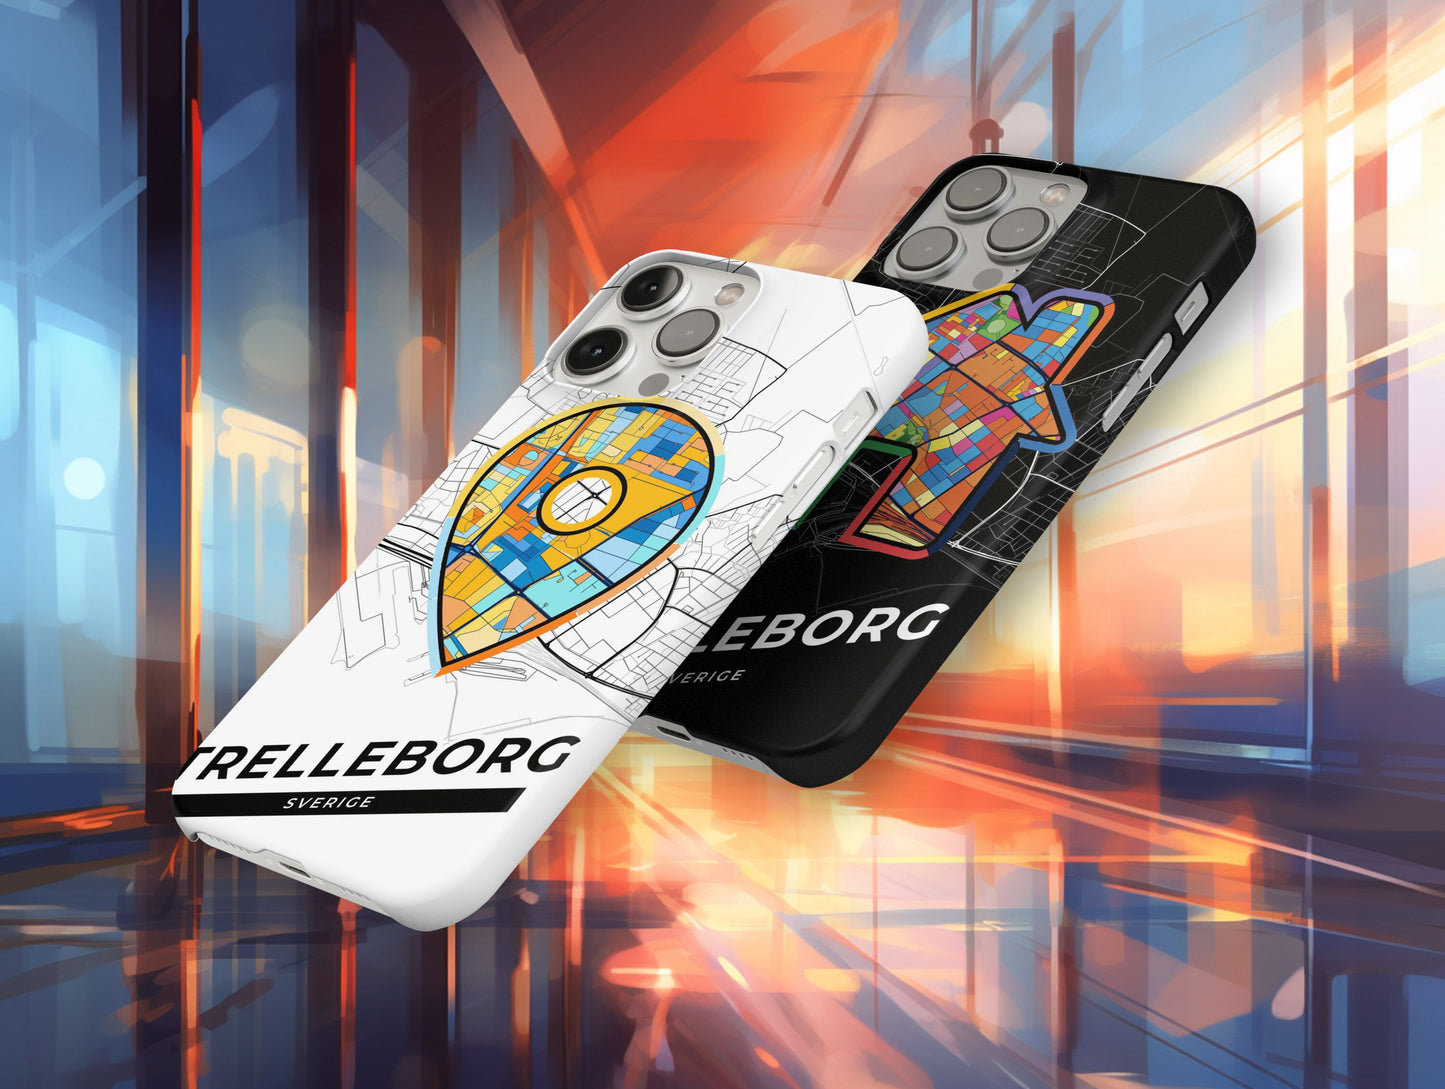 Trelleborg Sweden slim phone case with colorful icon